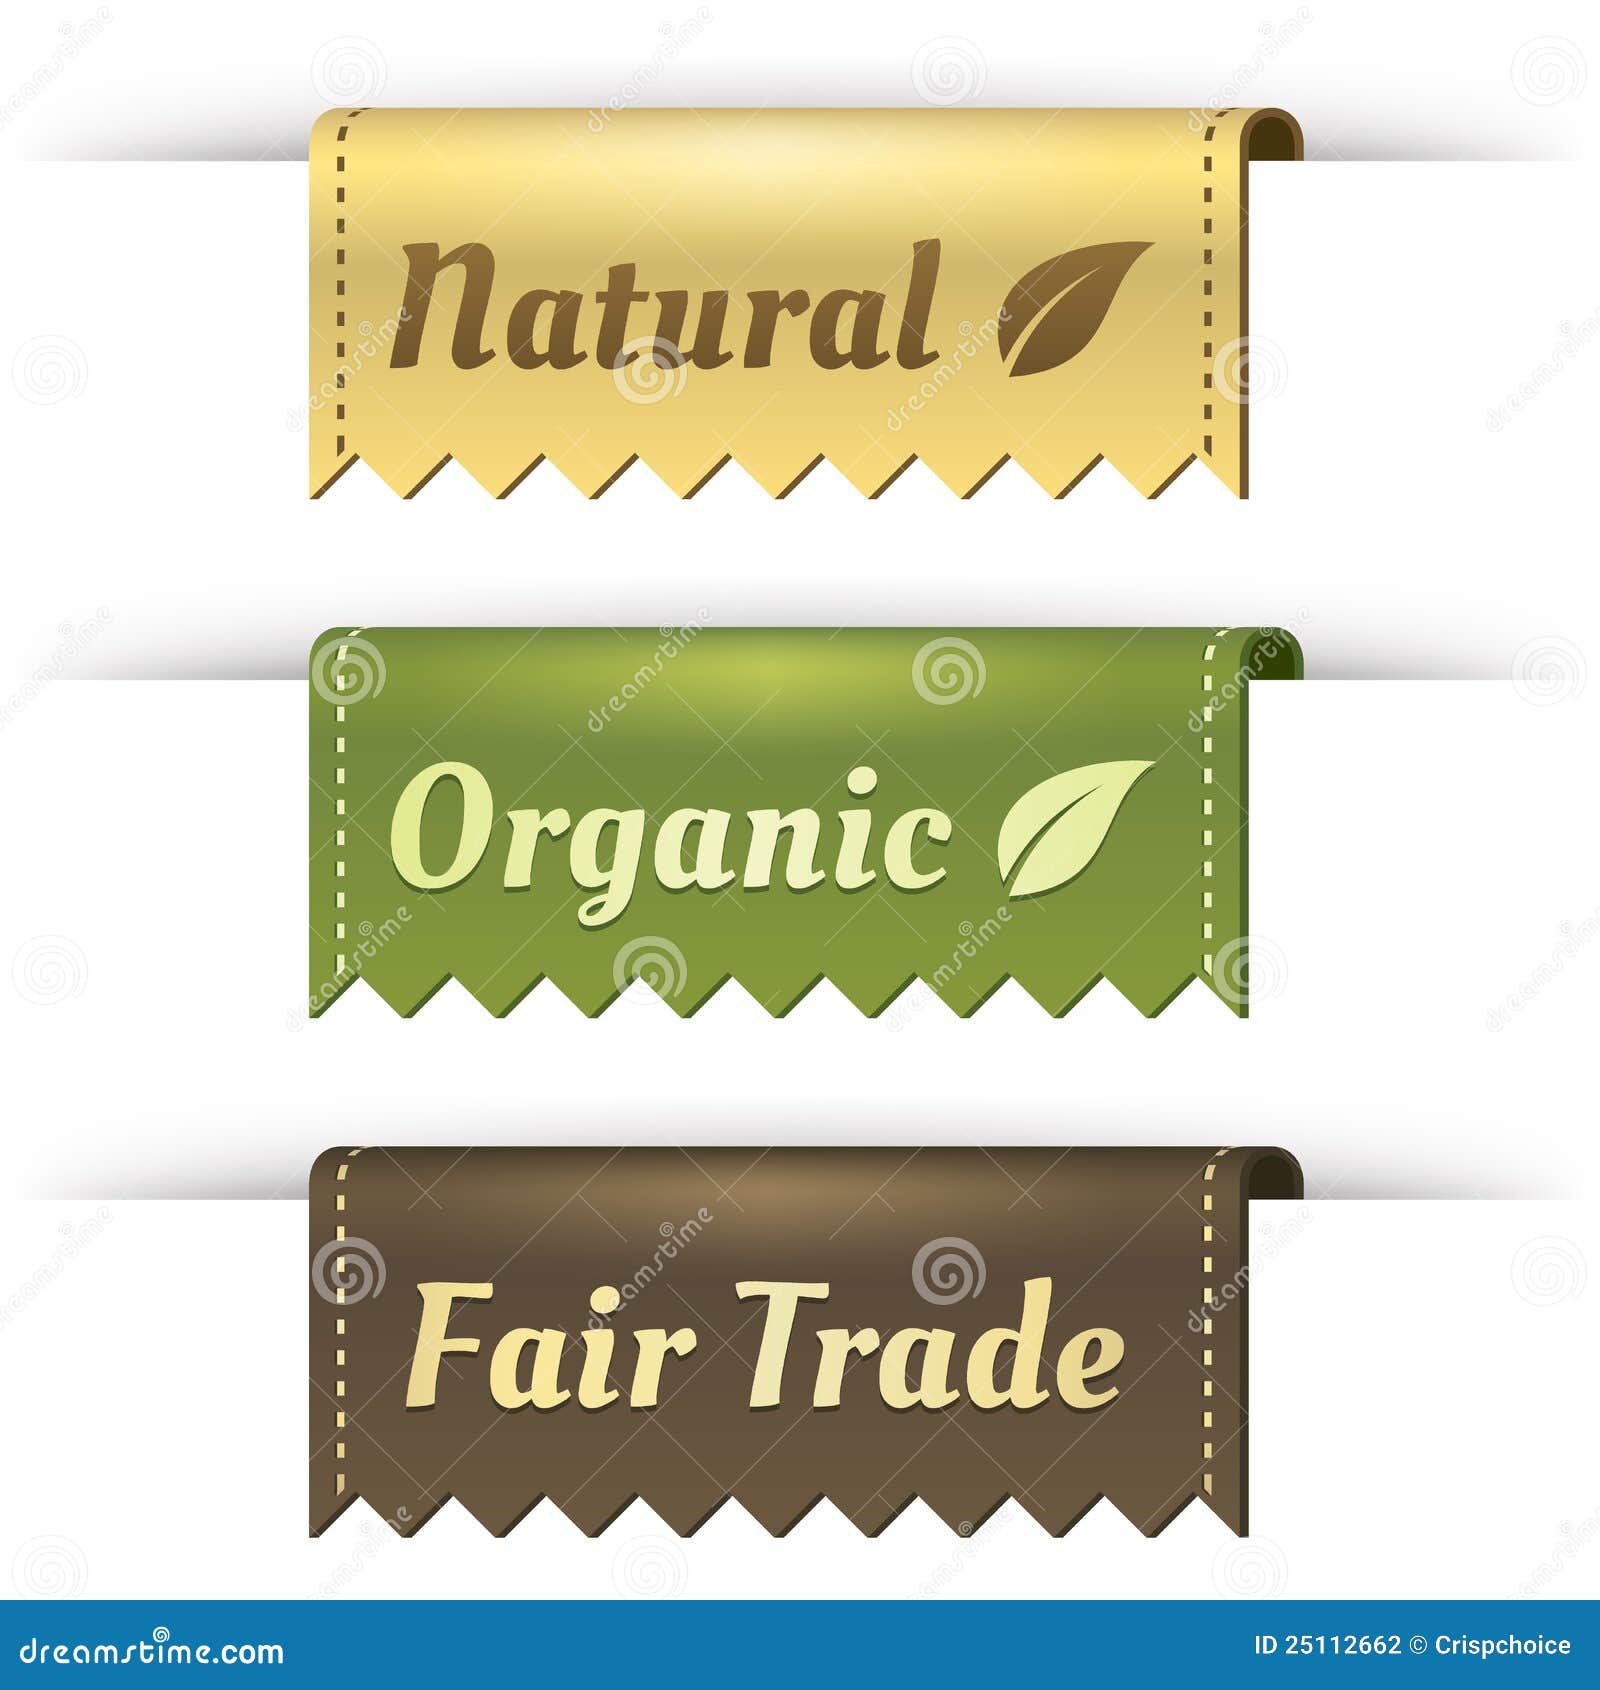 stylish tag labels for natural, organic, fairtrade